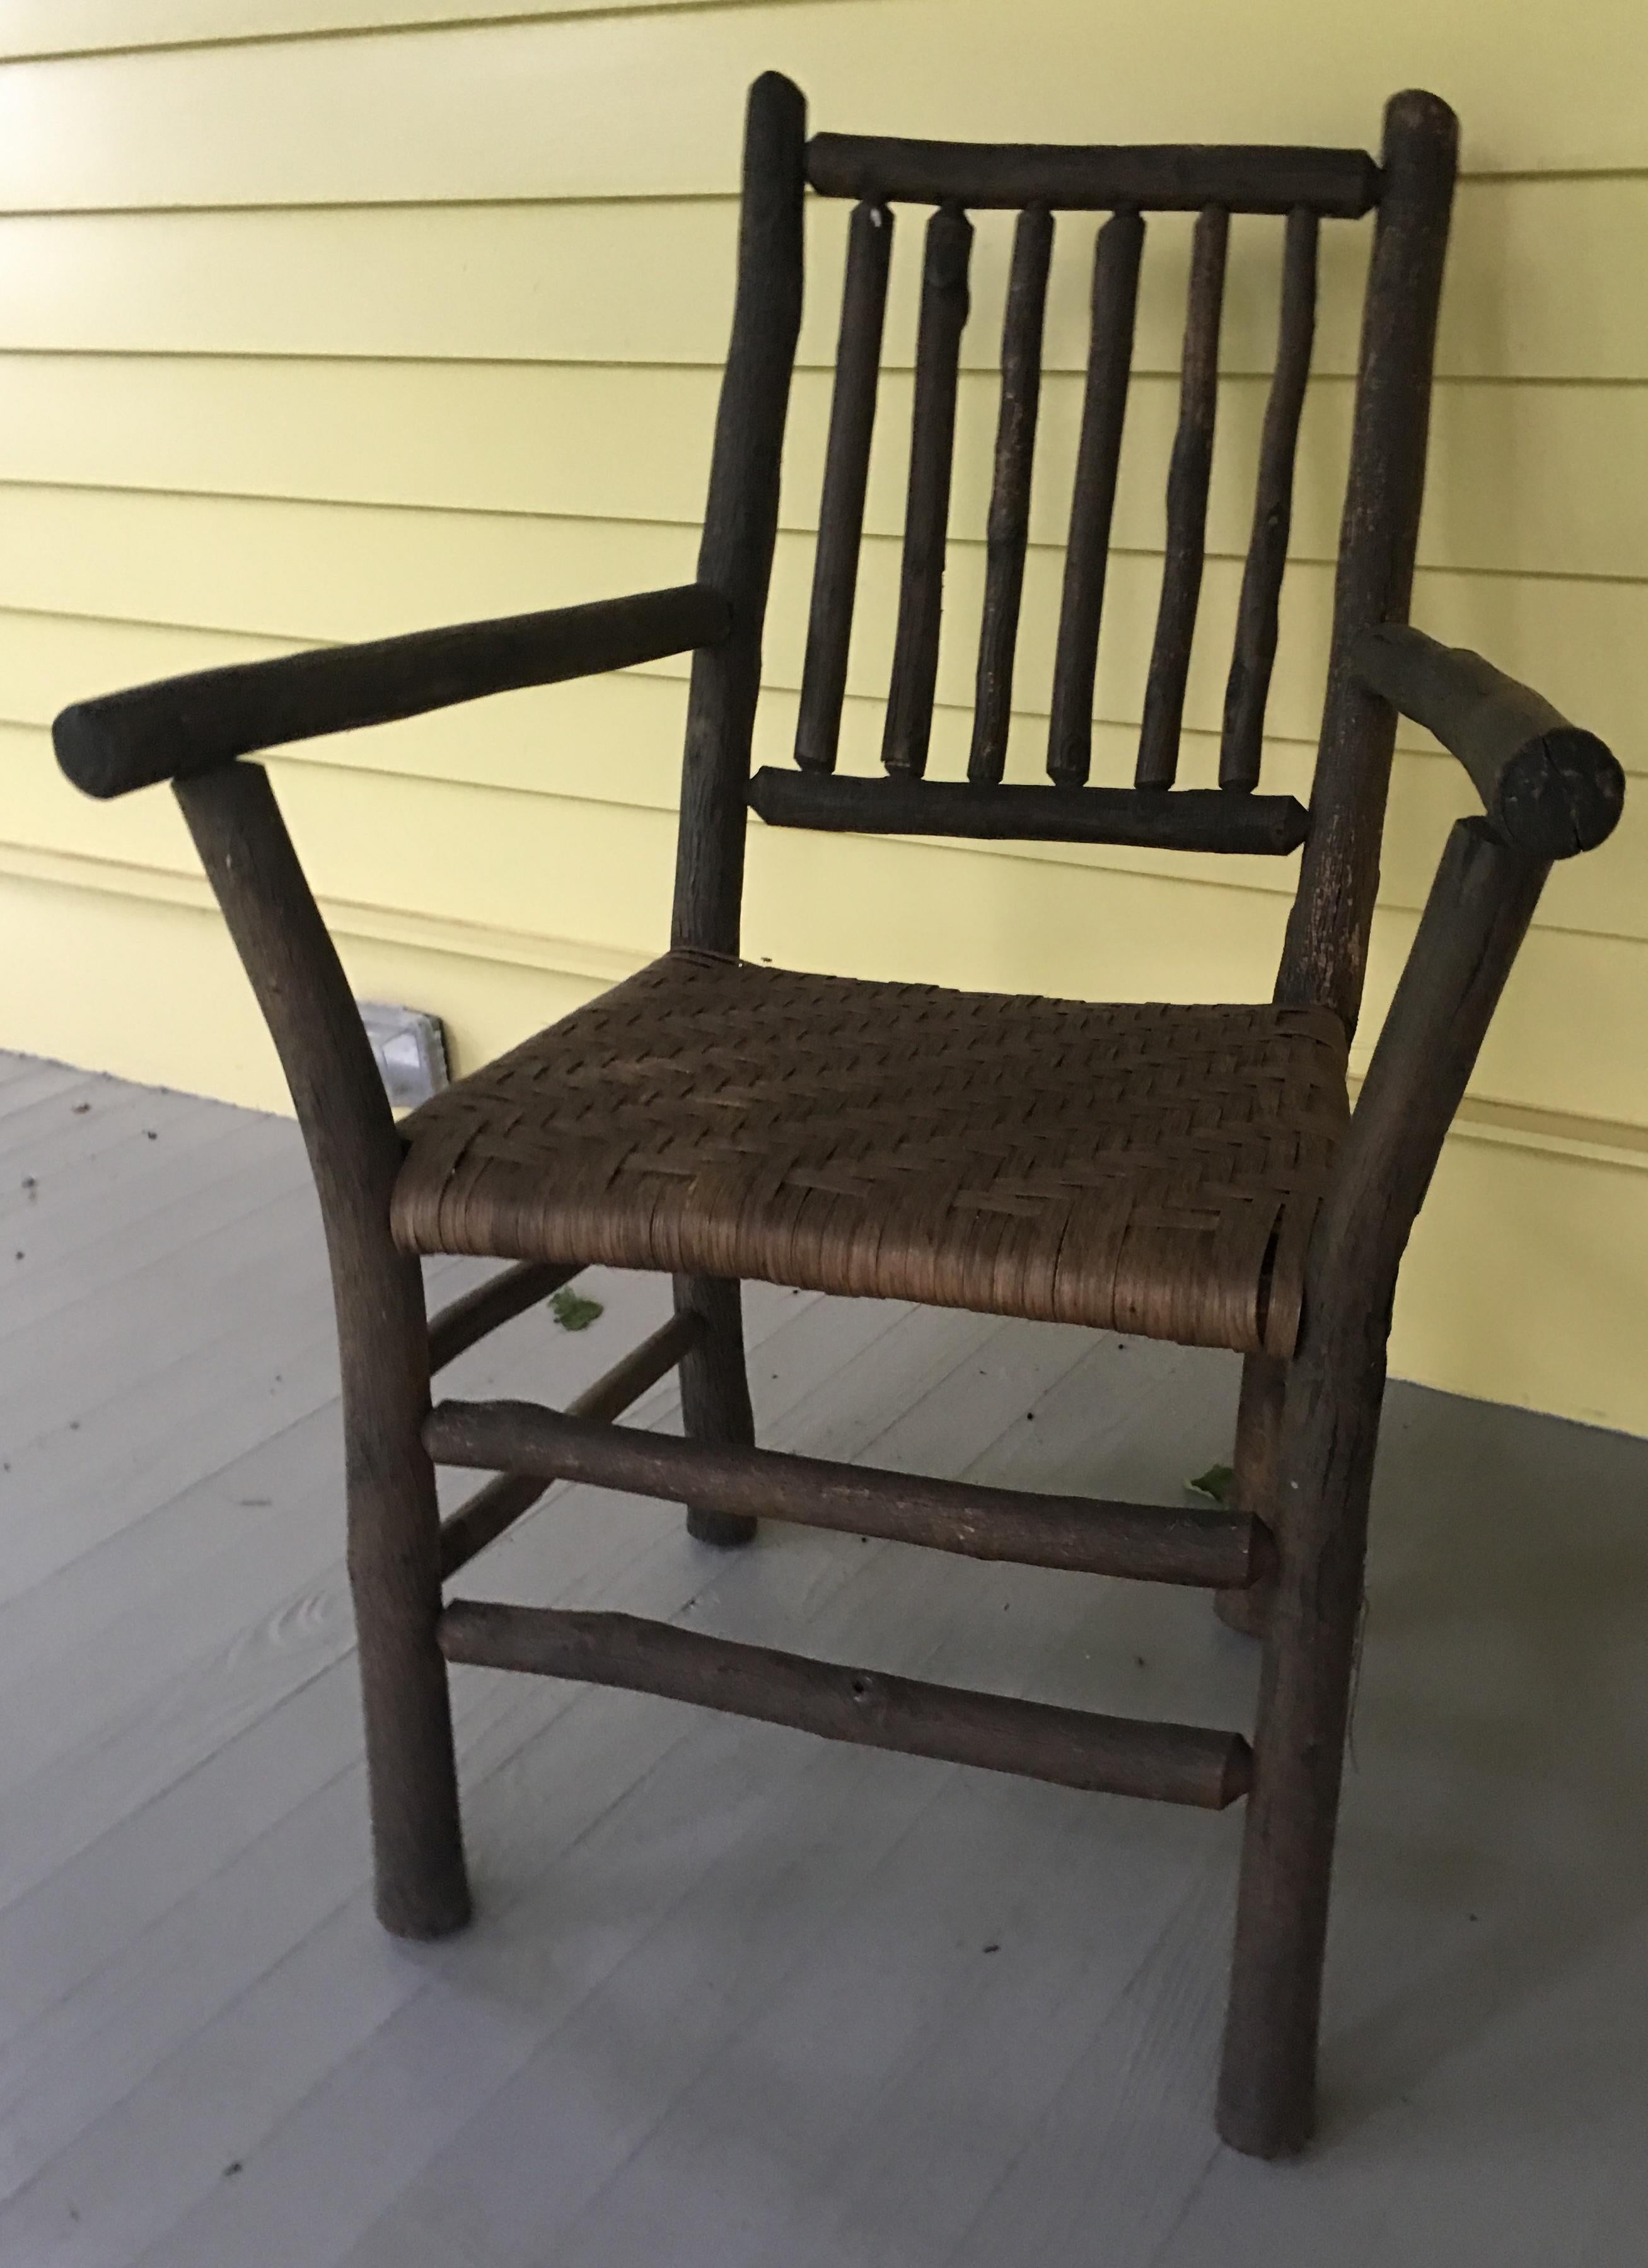 This Adirondack arm chair is great looking, solid construction, and a lovely addition to rustic settings, porch or patio. The woven seat is original and in good condition.  